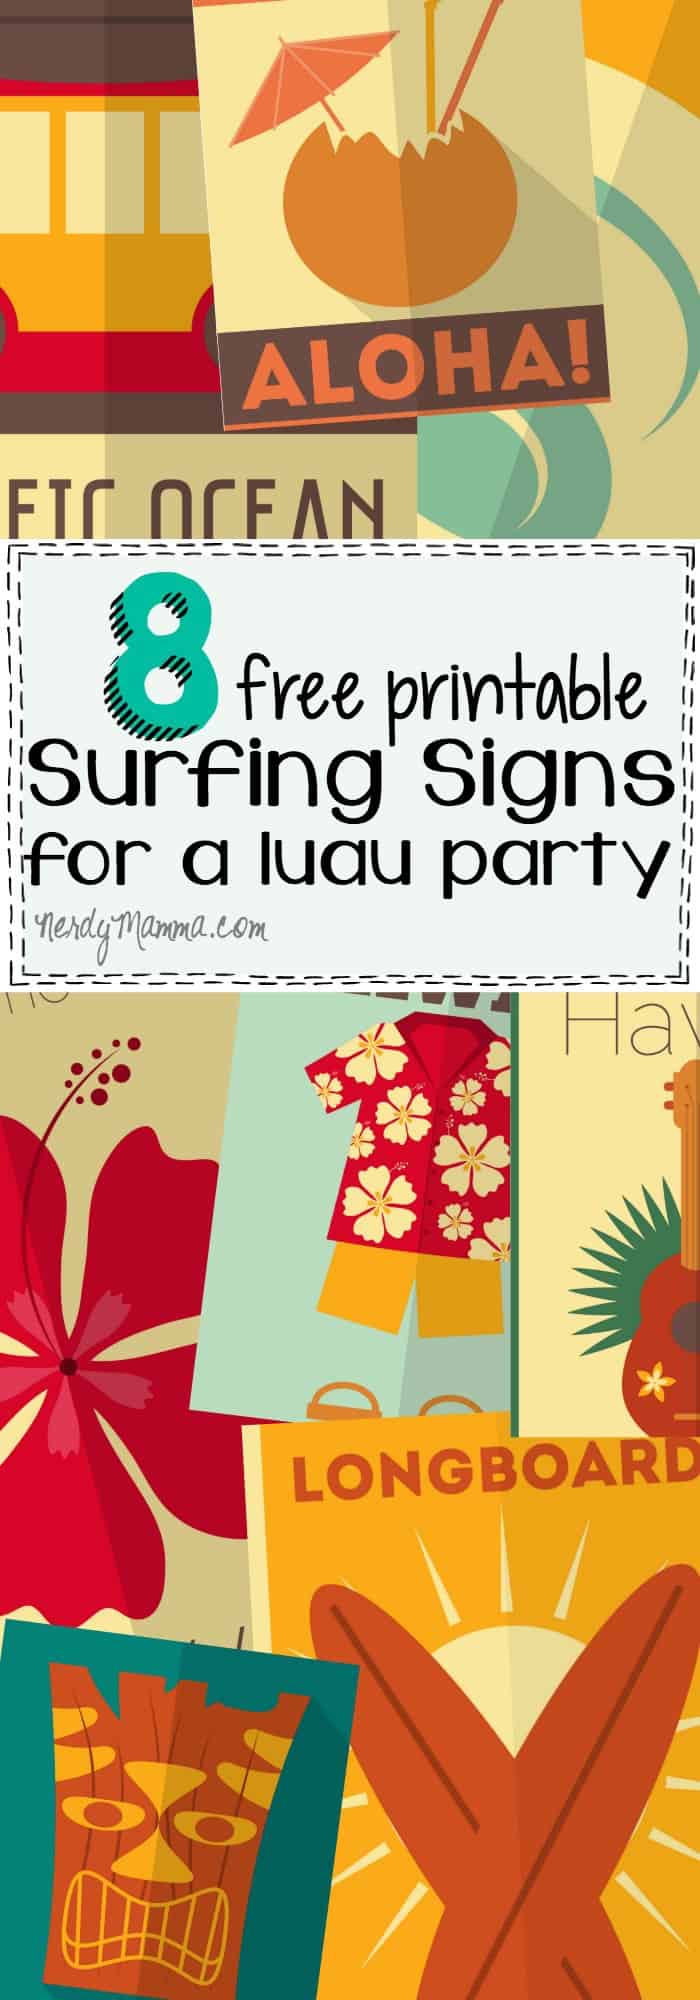 These free printable surfing signs would make awesome decorations for a surfing-themed party or a luau party--or even a surfing-themed kid's room! I love 'em!.